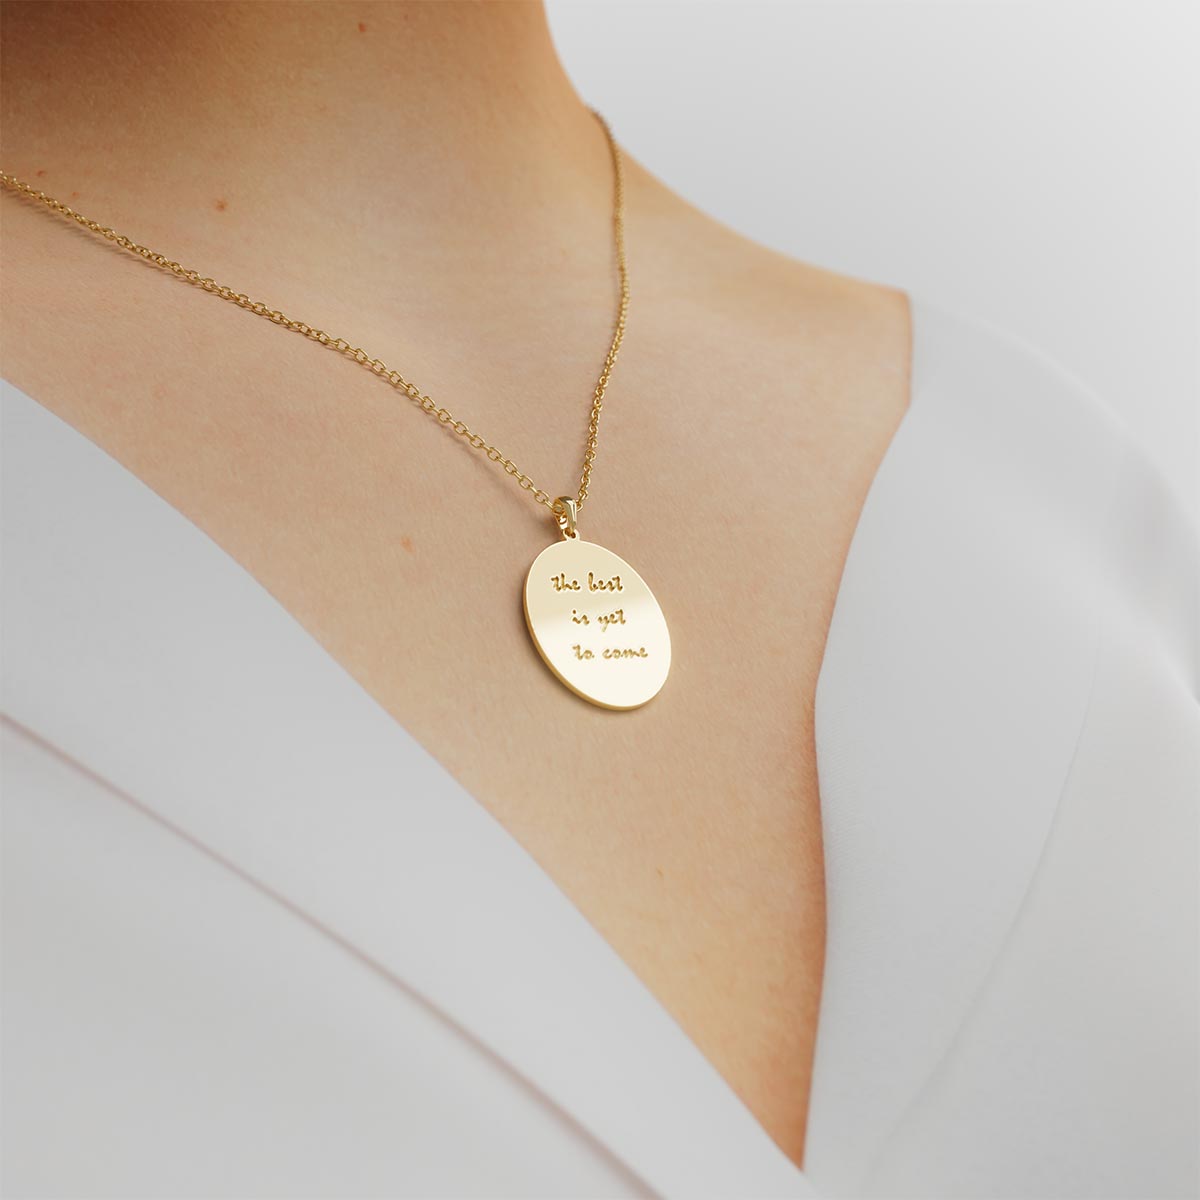 Personalized Oval Necklace with Engraving